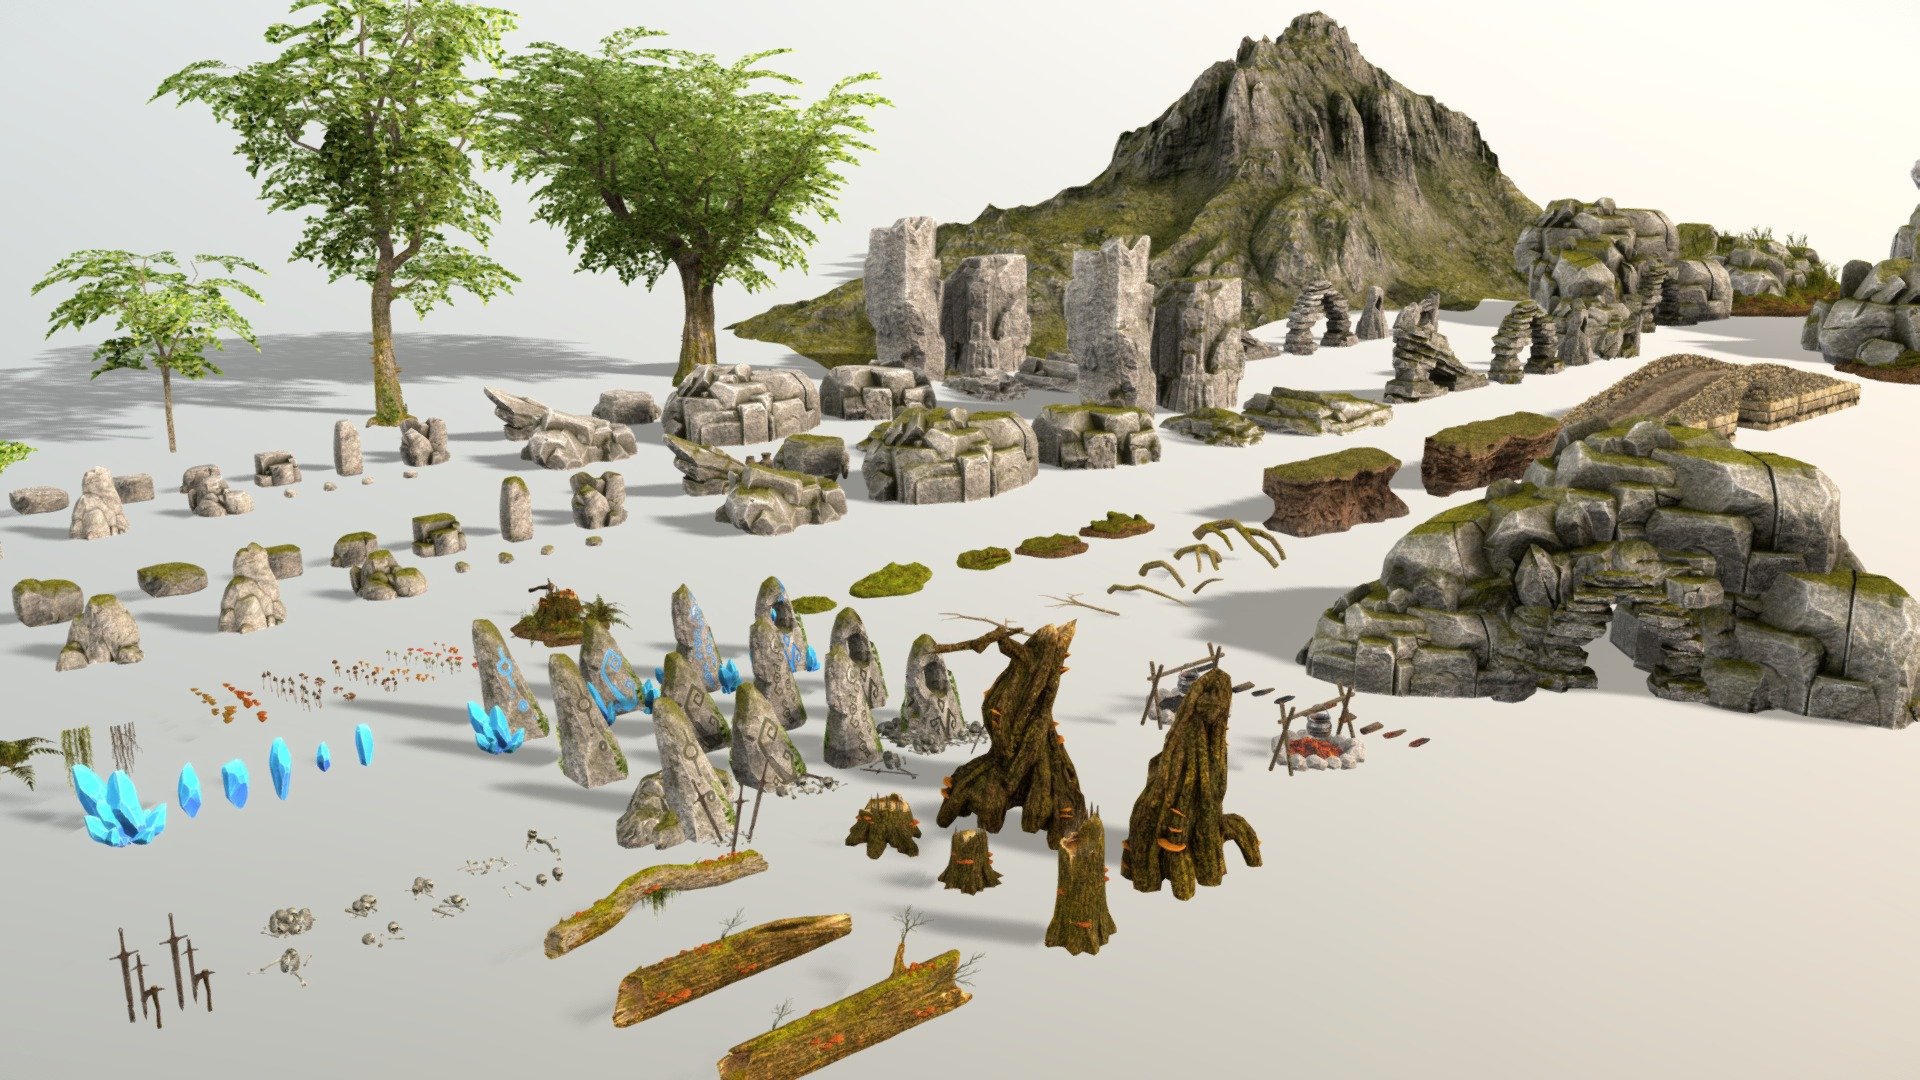 Pixel Art Nature pack

Hello! I hope you will like the package in pixel art style. It contains a lot of environment and nature models that are great for medieval/fantasy games. All created in blender, zbrush, substance painter and designer.
Models:
-Mountain
-Birch trees
-Beech trees
-Oak Trees
-Bushes
-A lot of rocks
-Bridge
-Caves entrances
-Cliffs
-Ferns
-Ivy
-Moss
-Mushrooms
-Runestones
-Stumps
-Fireplaces
-Vases
-Bones
-Old Weapons
-Roots &amp; Branches
-Terrain Parts
-Hanging Plants

Includes:
-fbx/blend files
-some models have LODs
-240 models or complex compositions
-50 texture sets for PBR, Unity HDRP and Unreal 4 

if you like the package and would like to see more models in this style, let me know in the comment! ^^

*you need to set the texture filter to the nearest or point - Pixel Art Nature pack - Buy Royalty Free 3D model by Avgust9 3d model